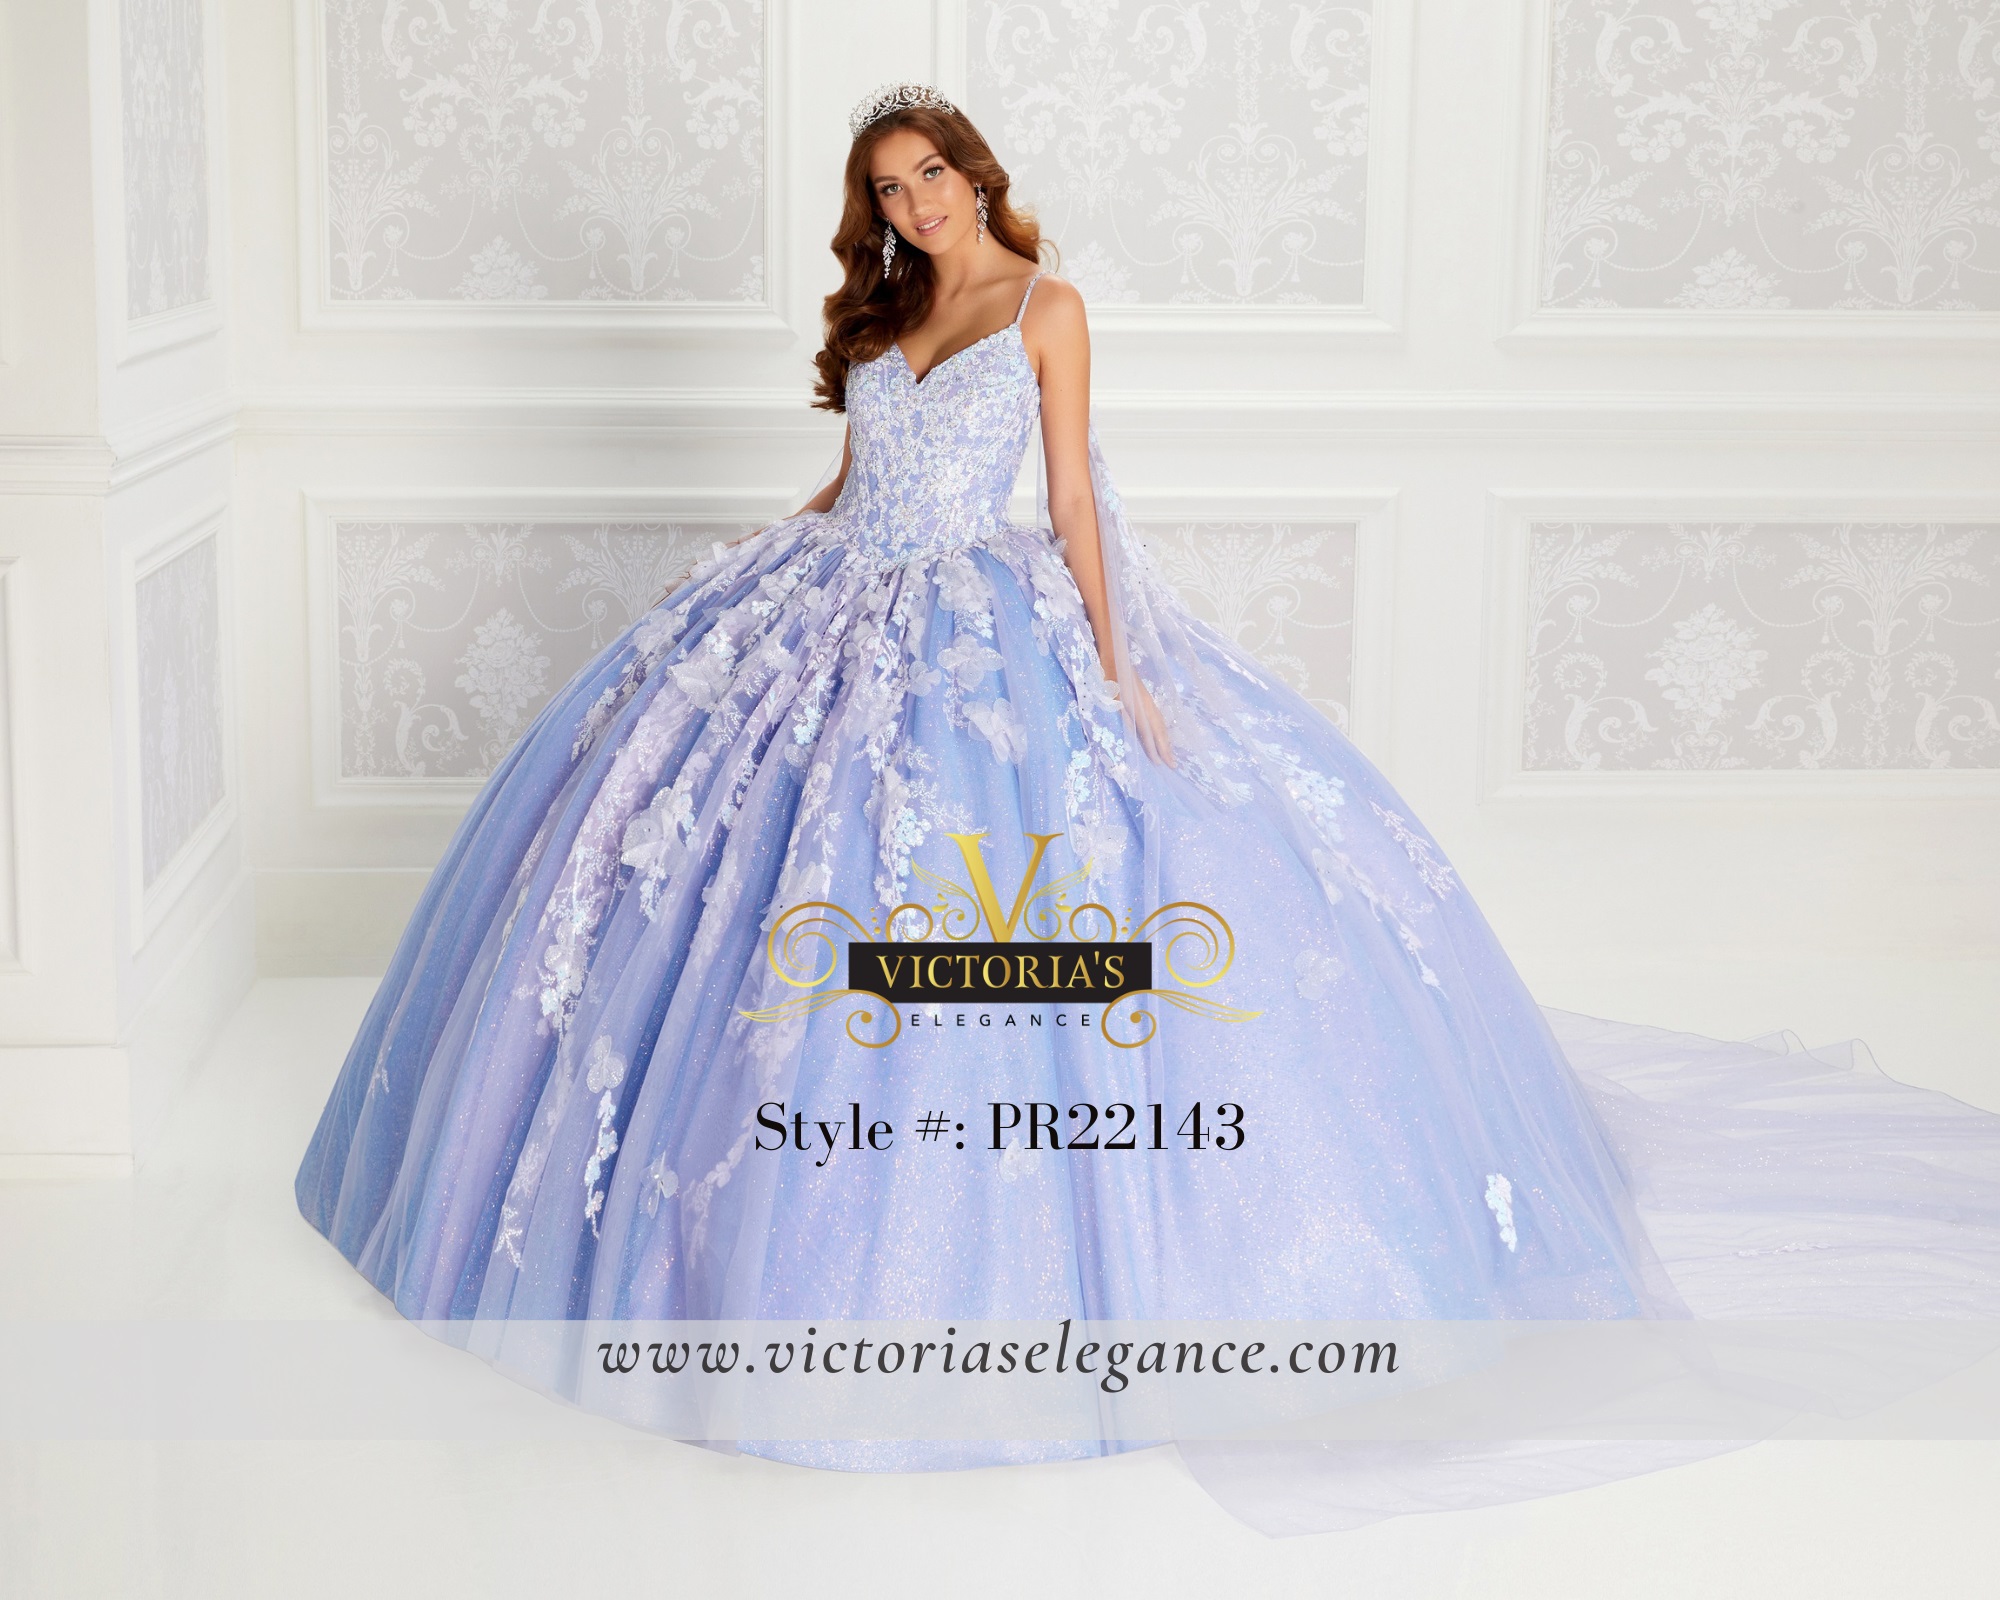 Princesa by Ariana Vara Shimmering Tulle Ball Gown with Floral Applique and Detachable Cape